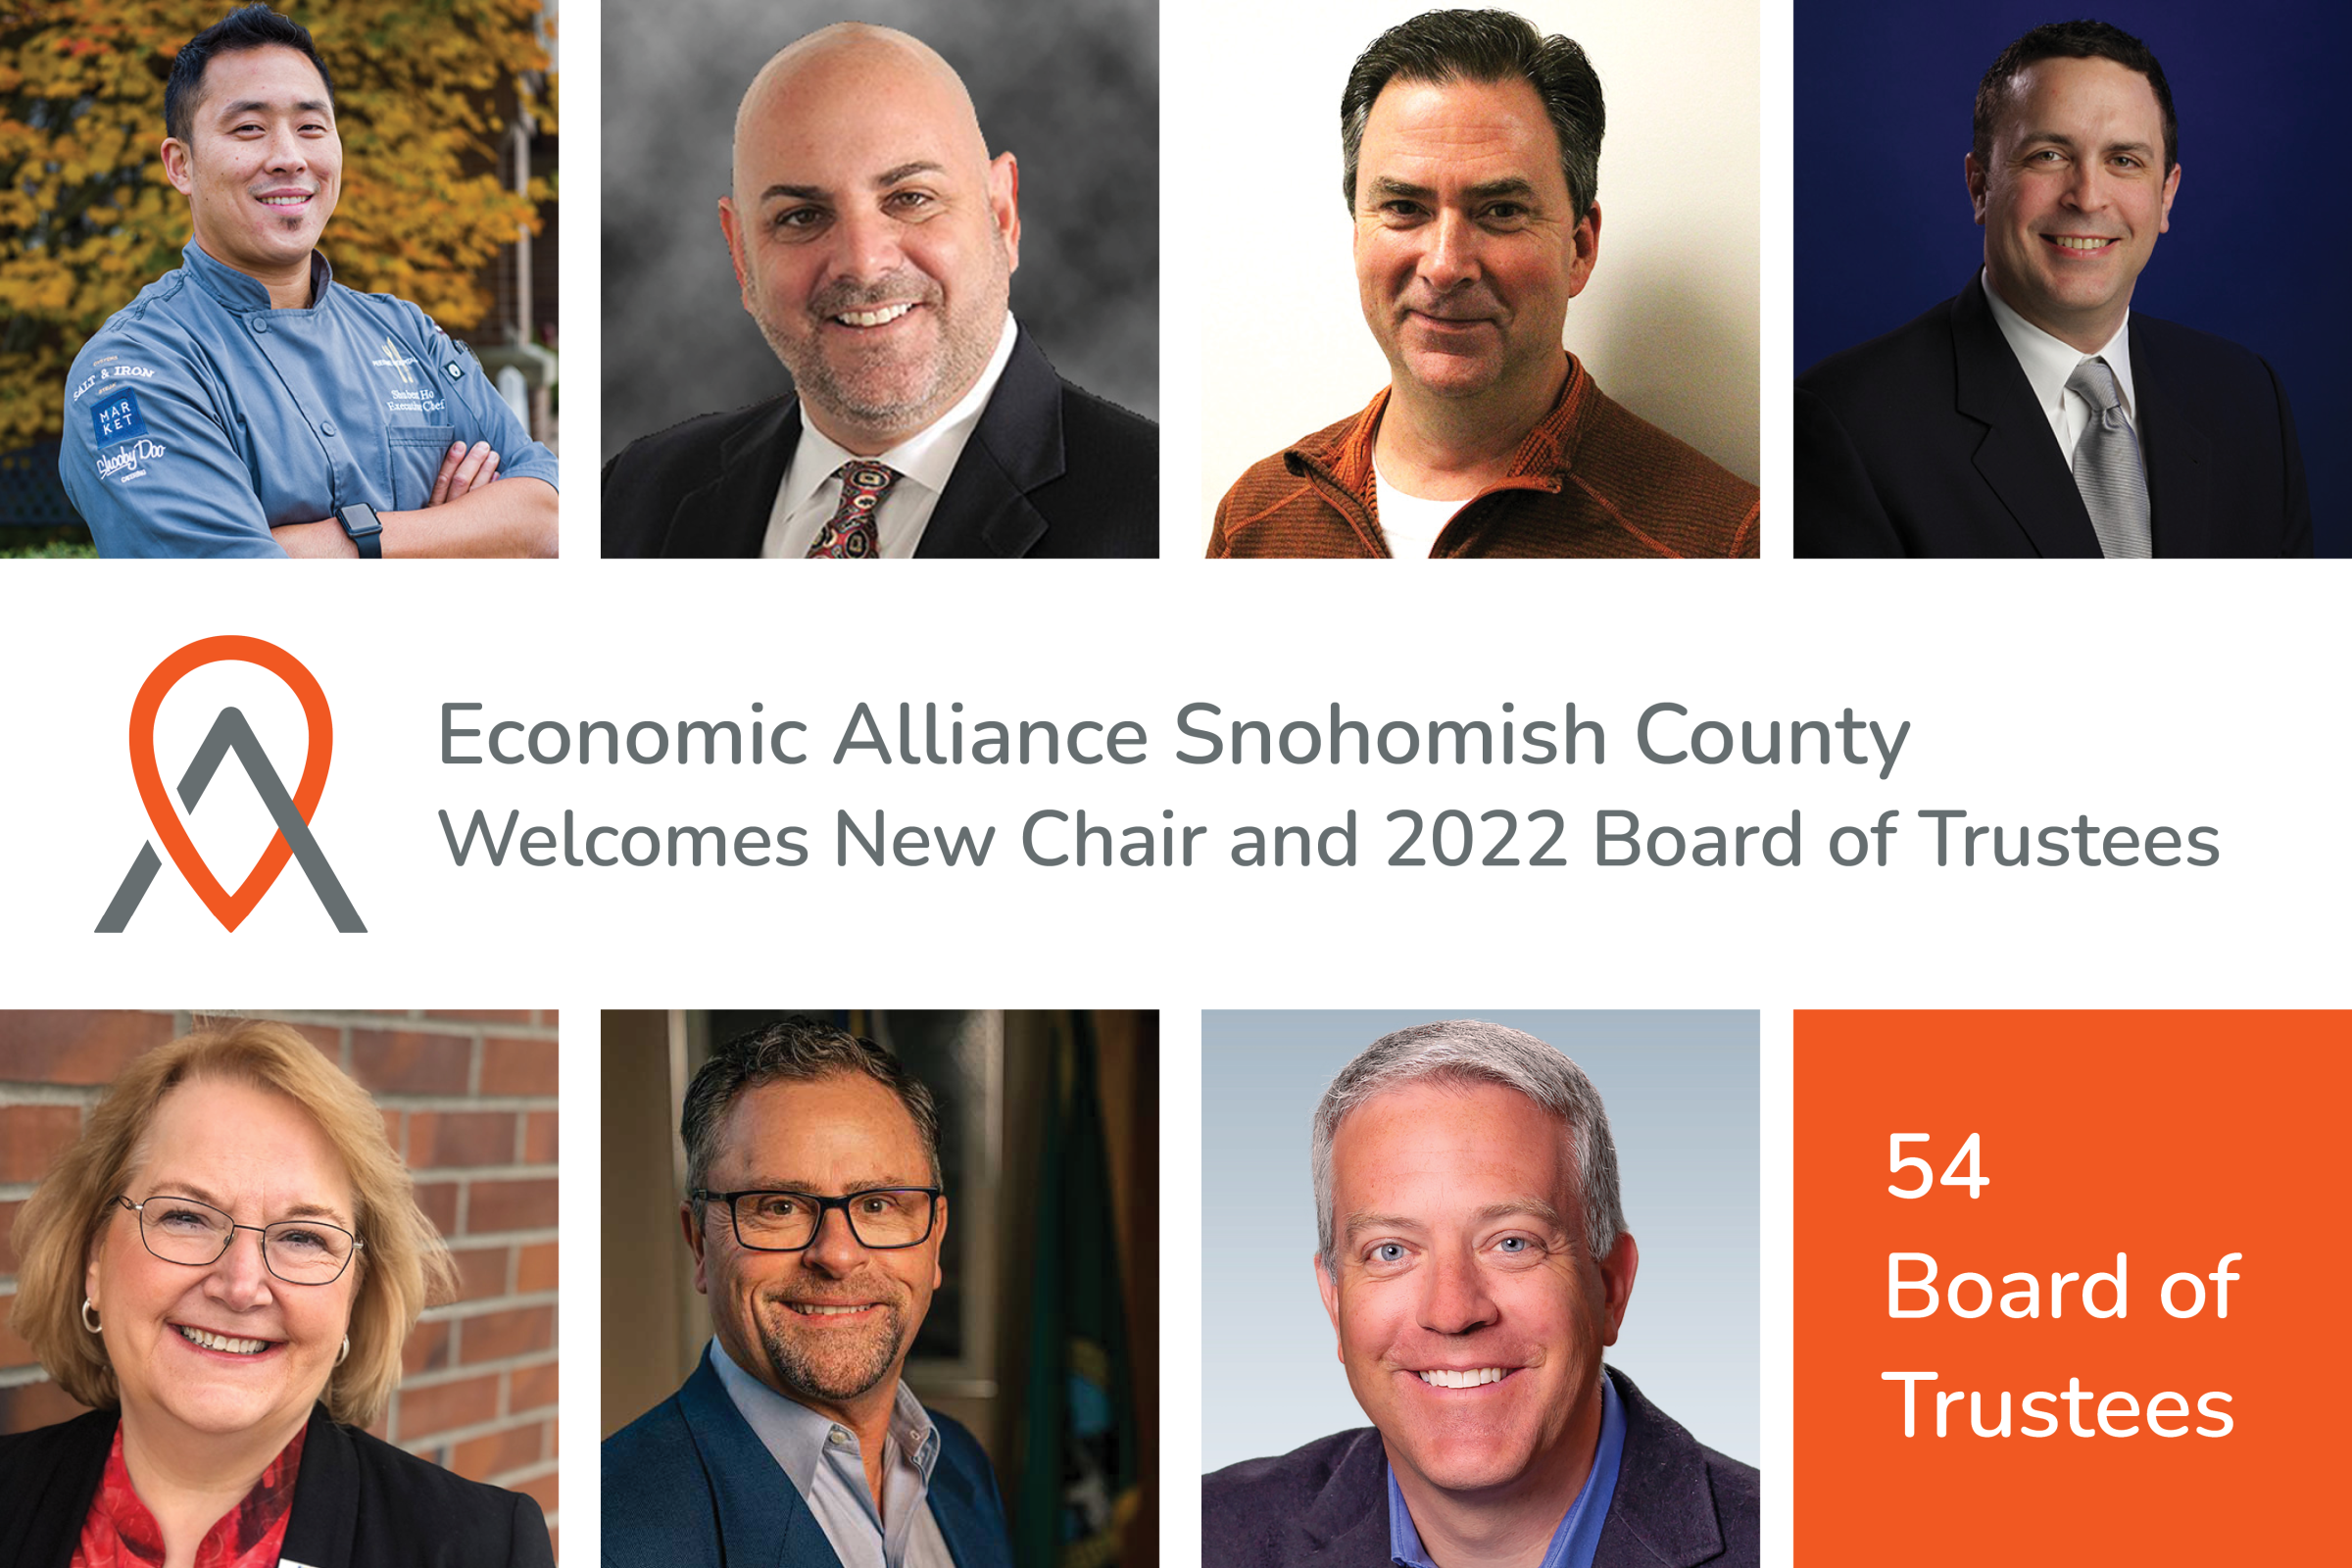 Economic Alliance Snohomish County (EASC) Welcomes New Chair and 2022 Board of Trustees Main Photo